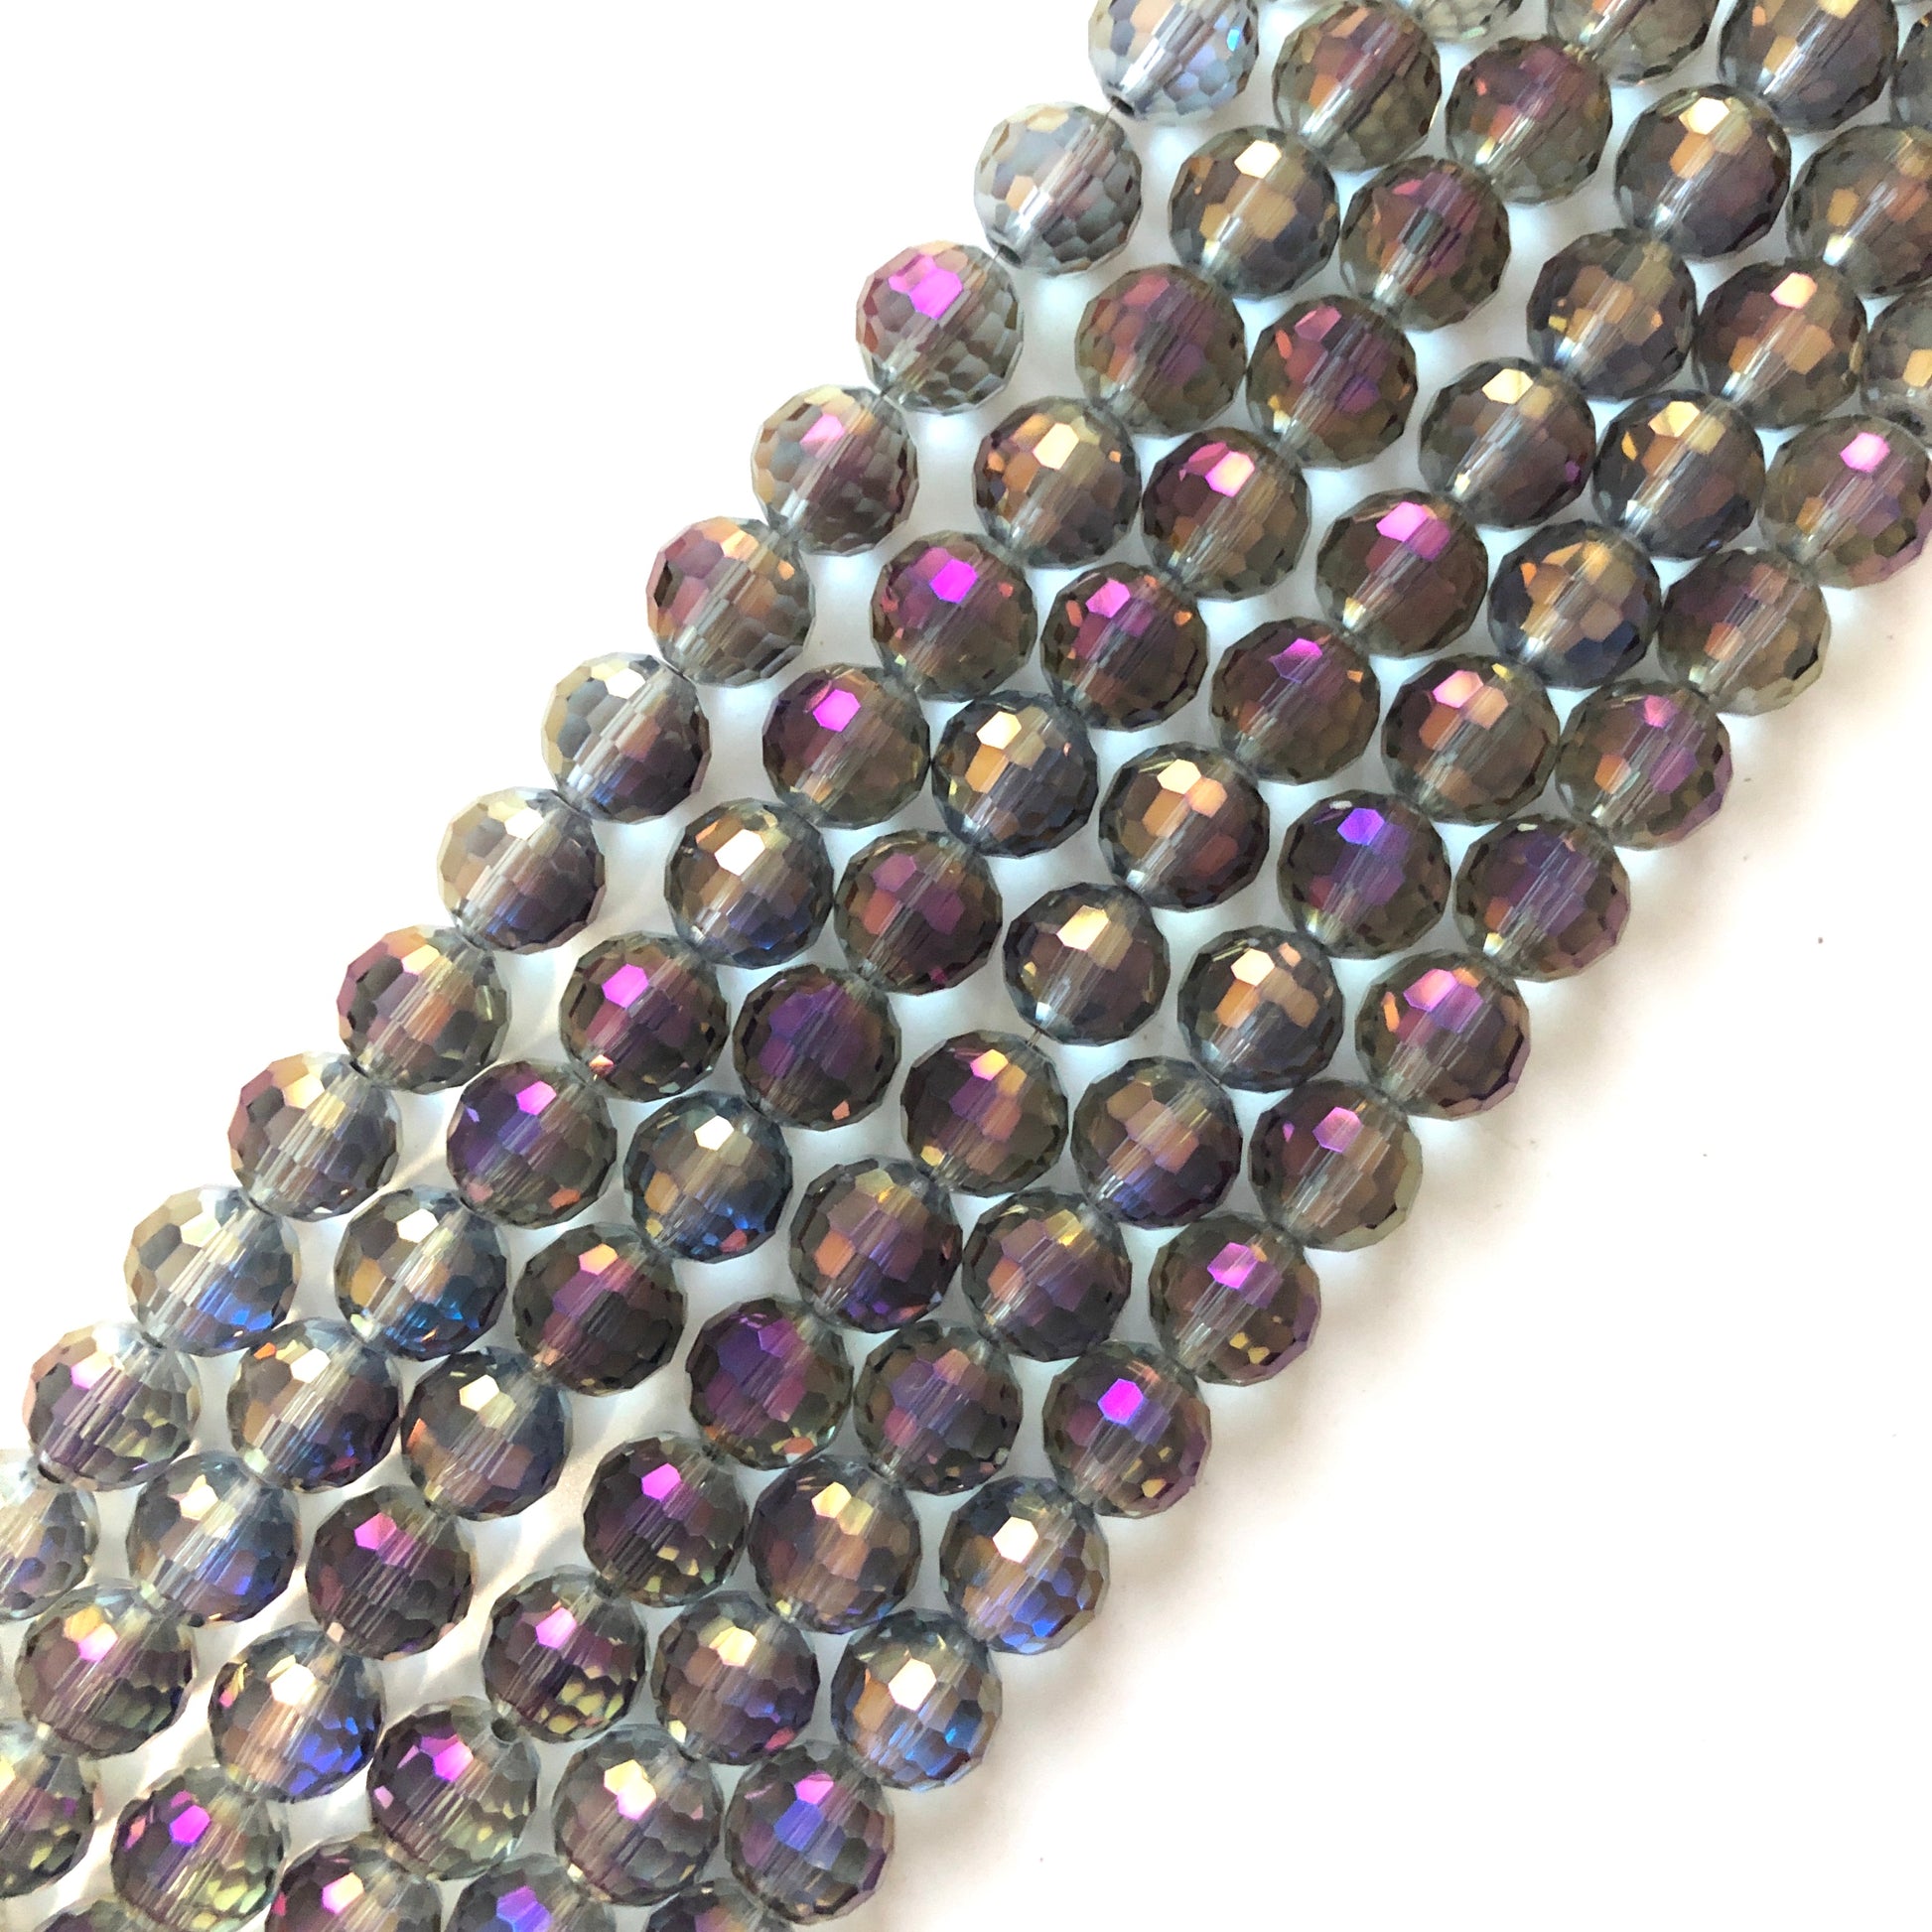 2 Strands/lot 10mm Purple AB 96 Faceted Glass Beads Glass Beads Faceted Glass Beads Charms Beads Beyond